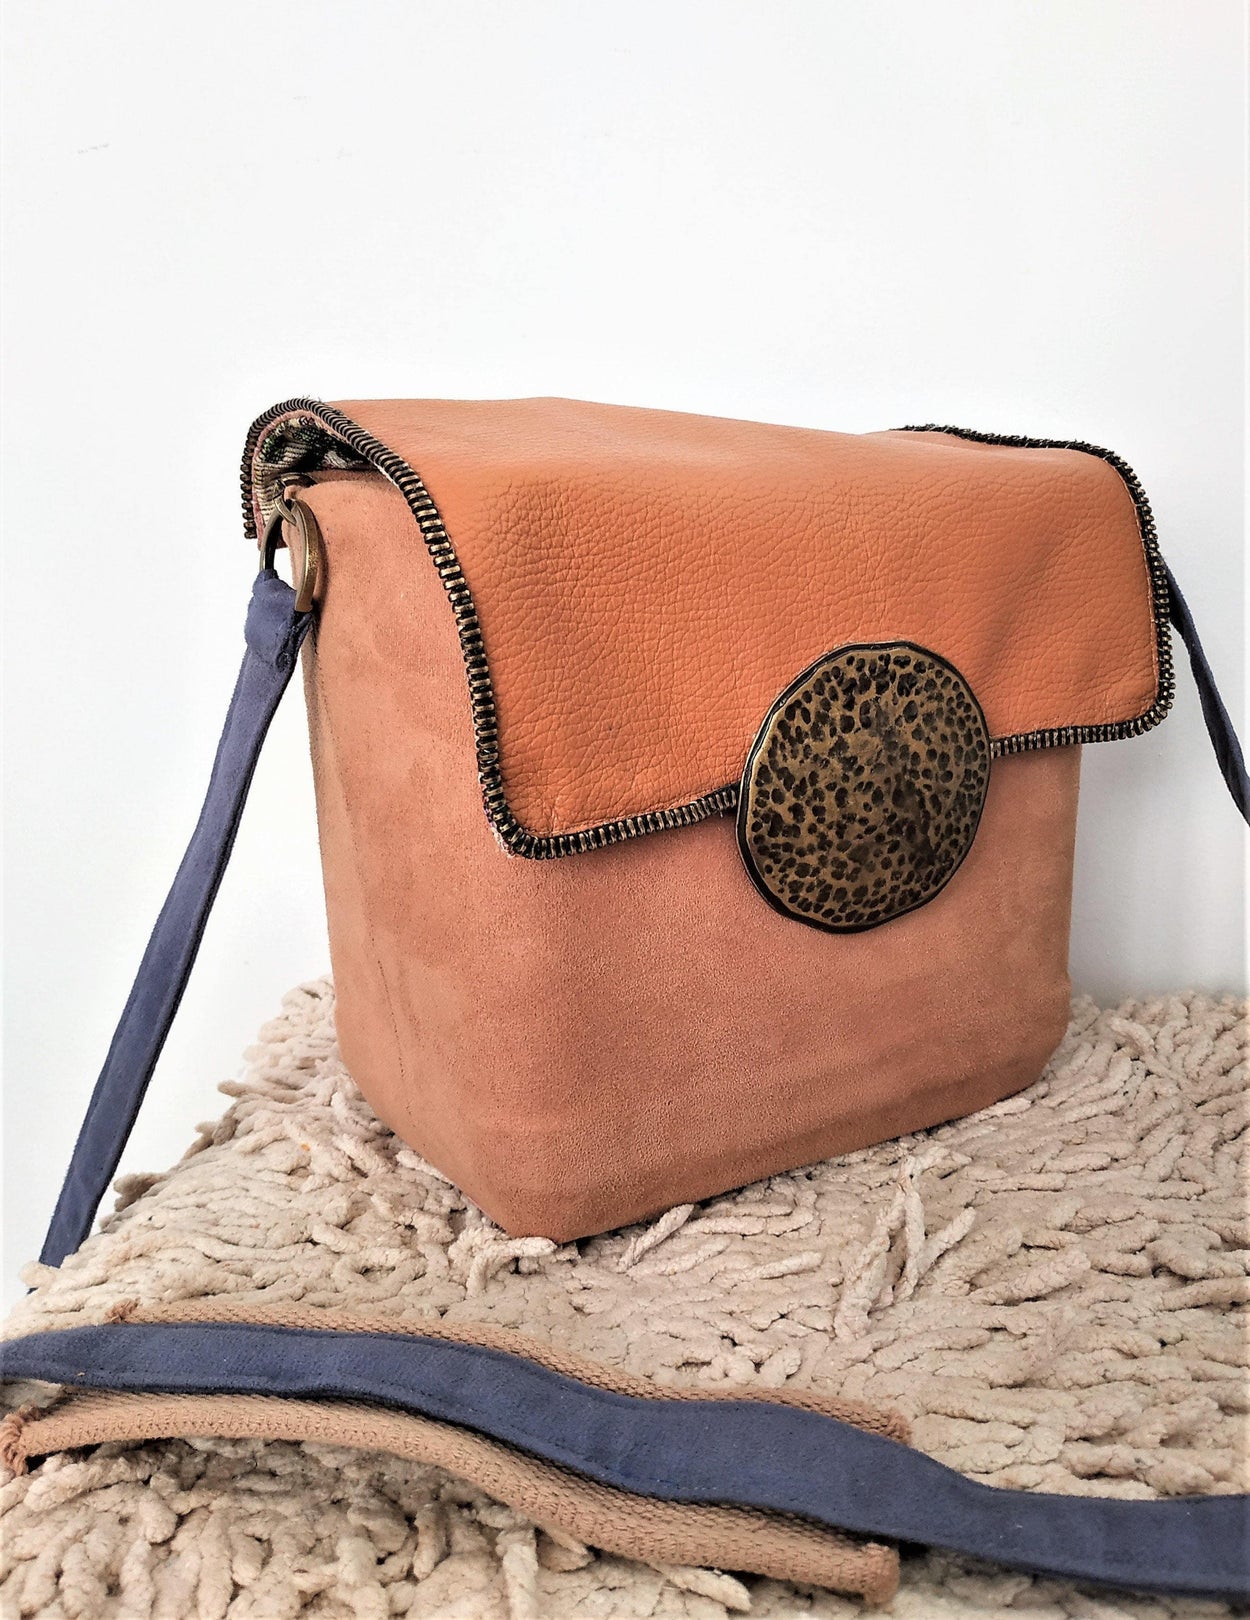 Cube-bag made of artificial suede, tapestry and leather - GLEZANT designer goods store. 